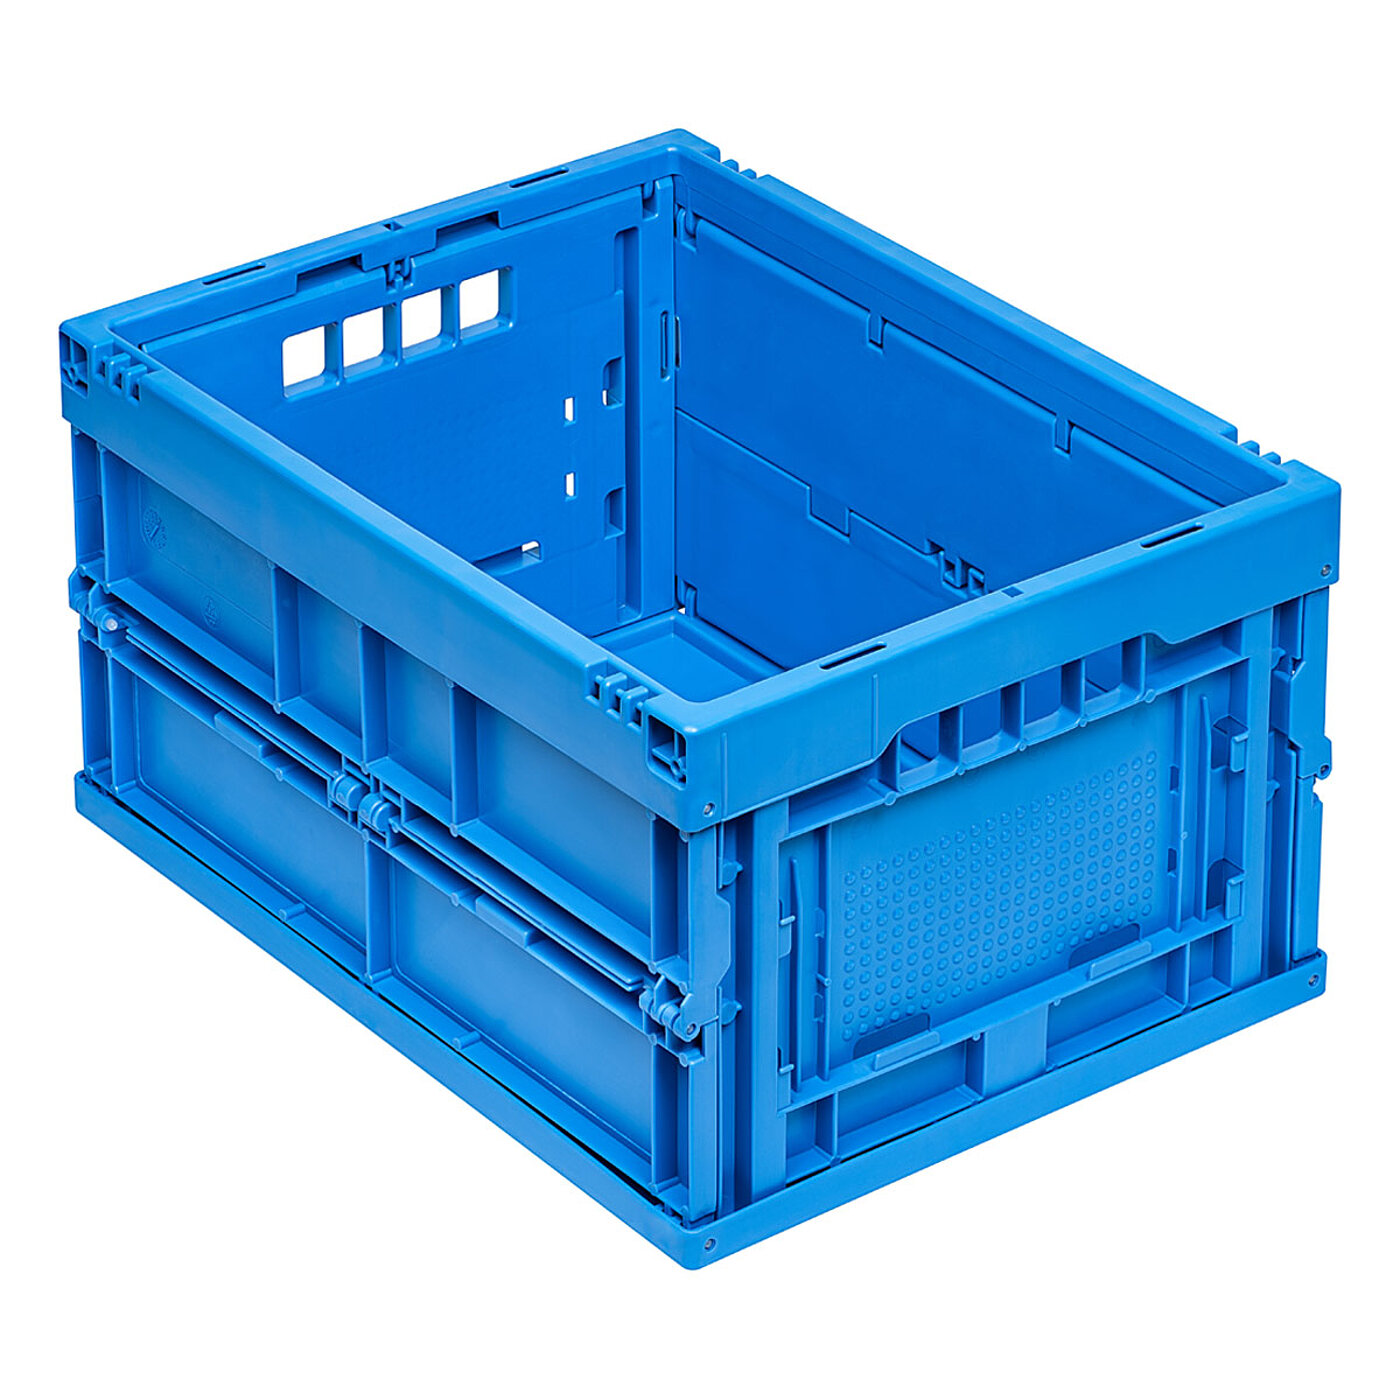 a blue foldable box made of plastics, in view from askew, isolated on white background